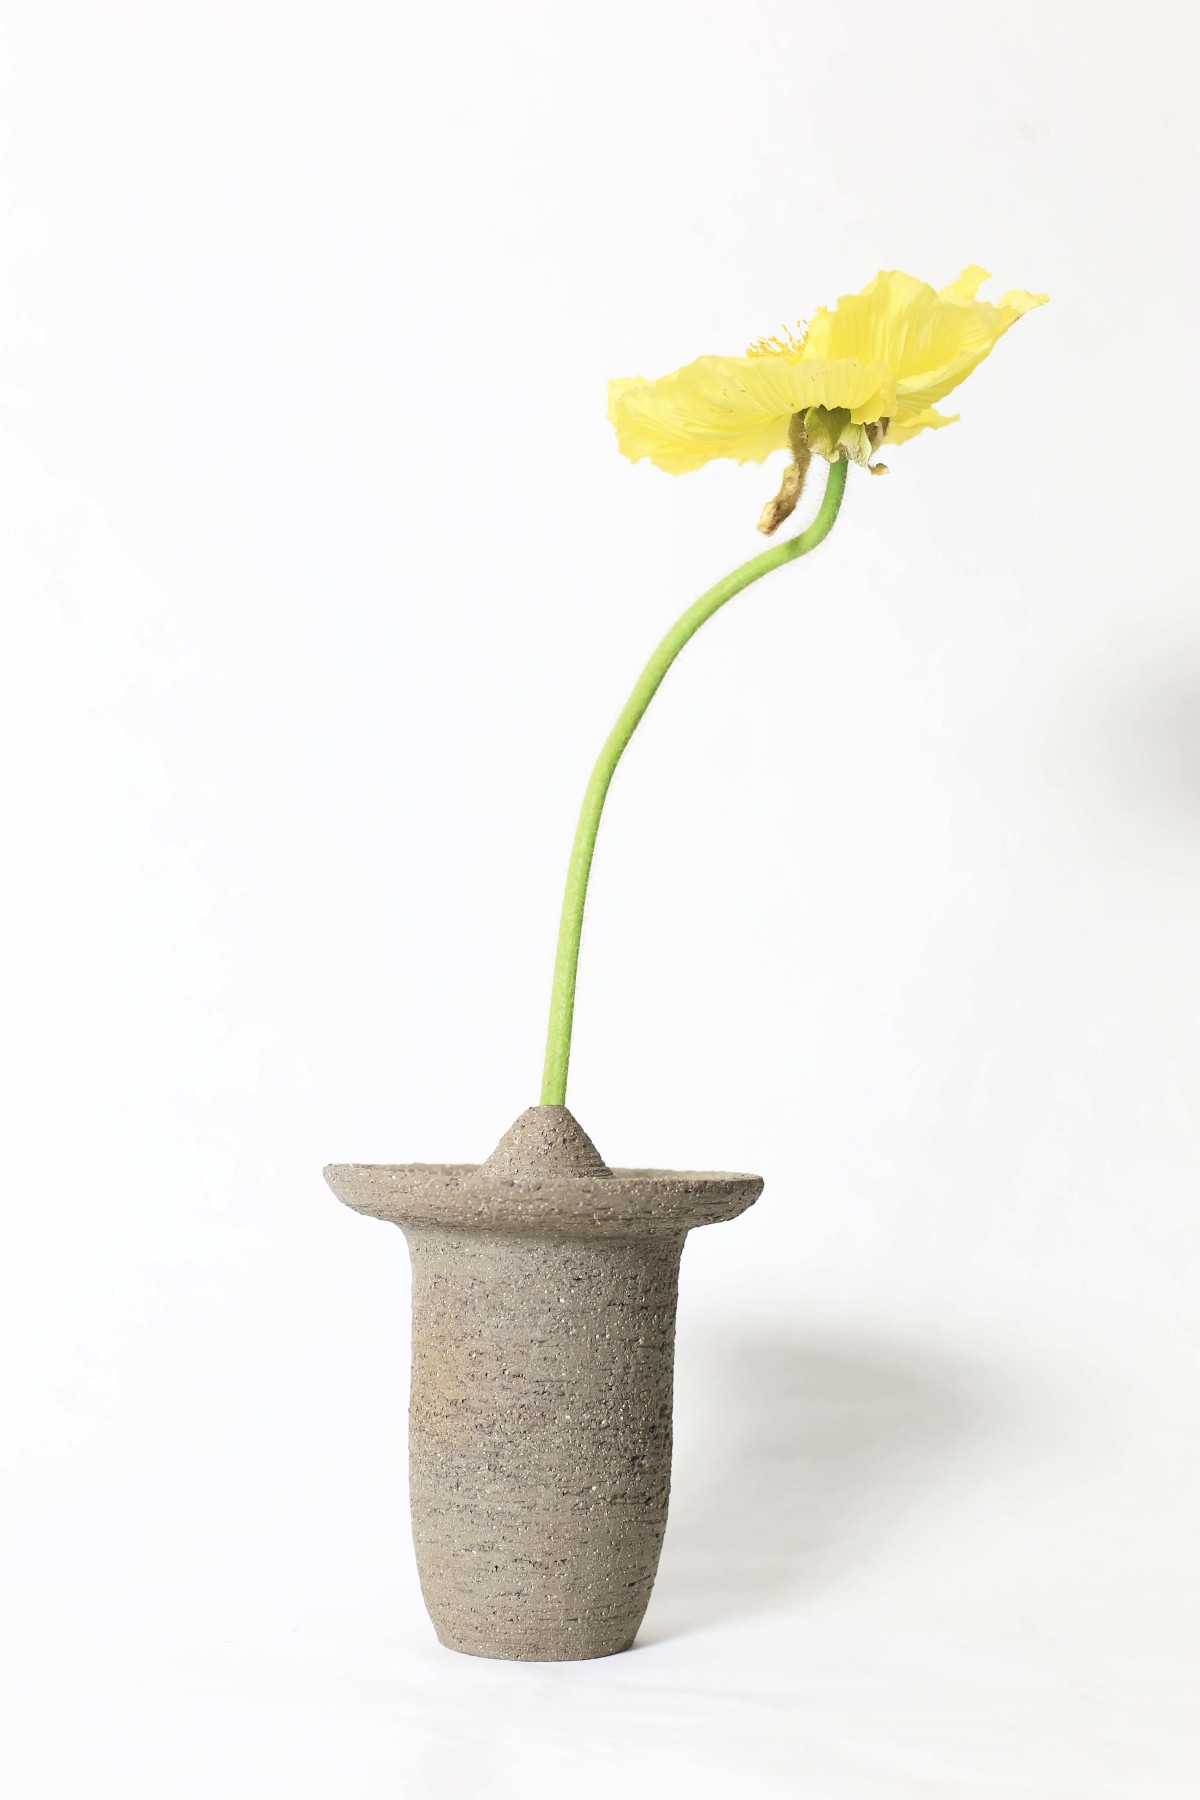 Ufo shaped gray ceramic vase with a yellow flower on a white background 3